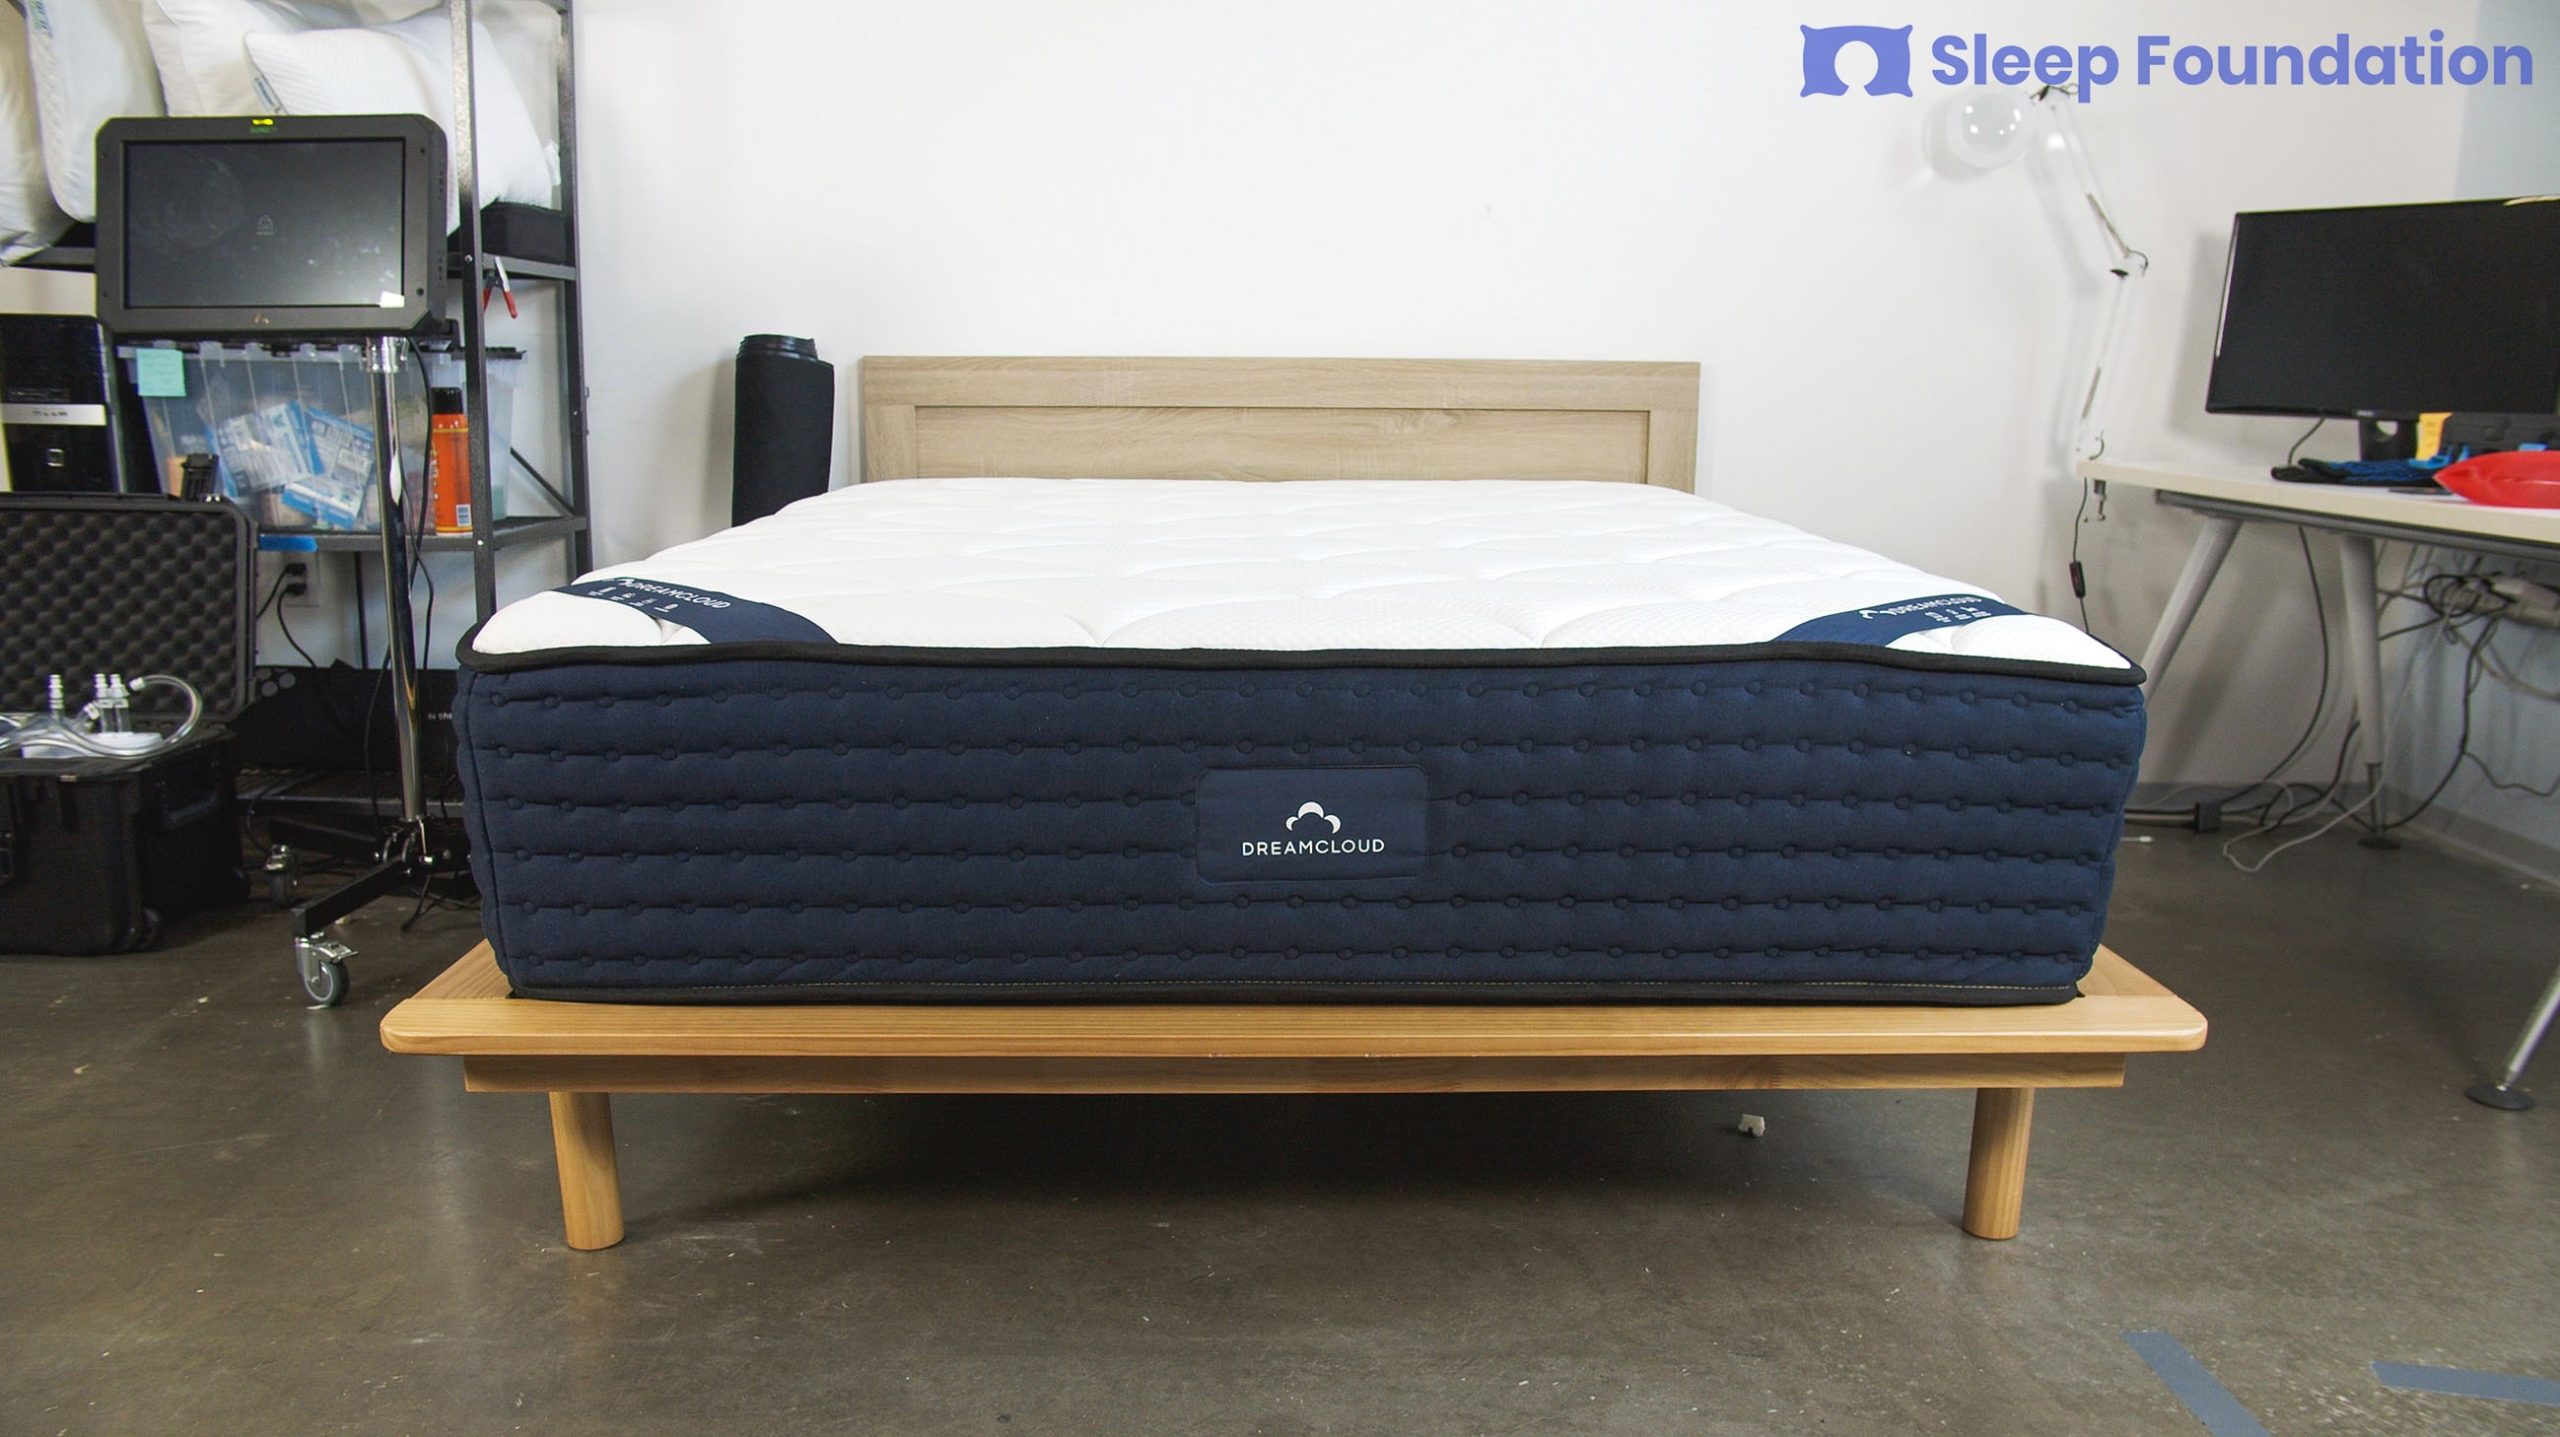 do any stores sell dreamcloud mattress